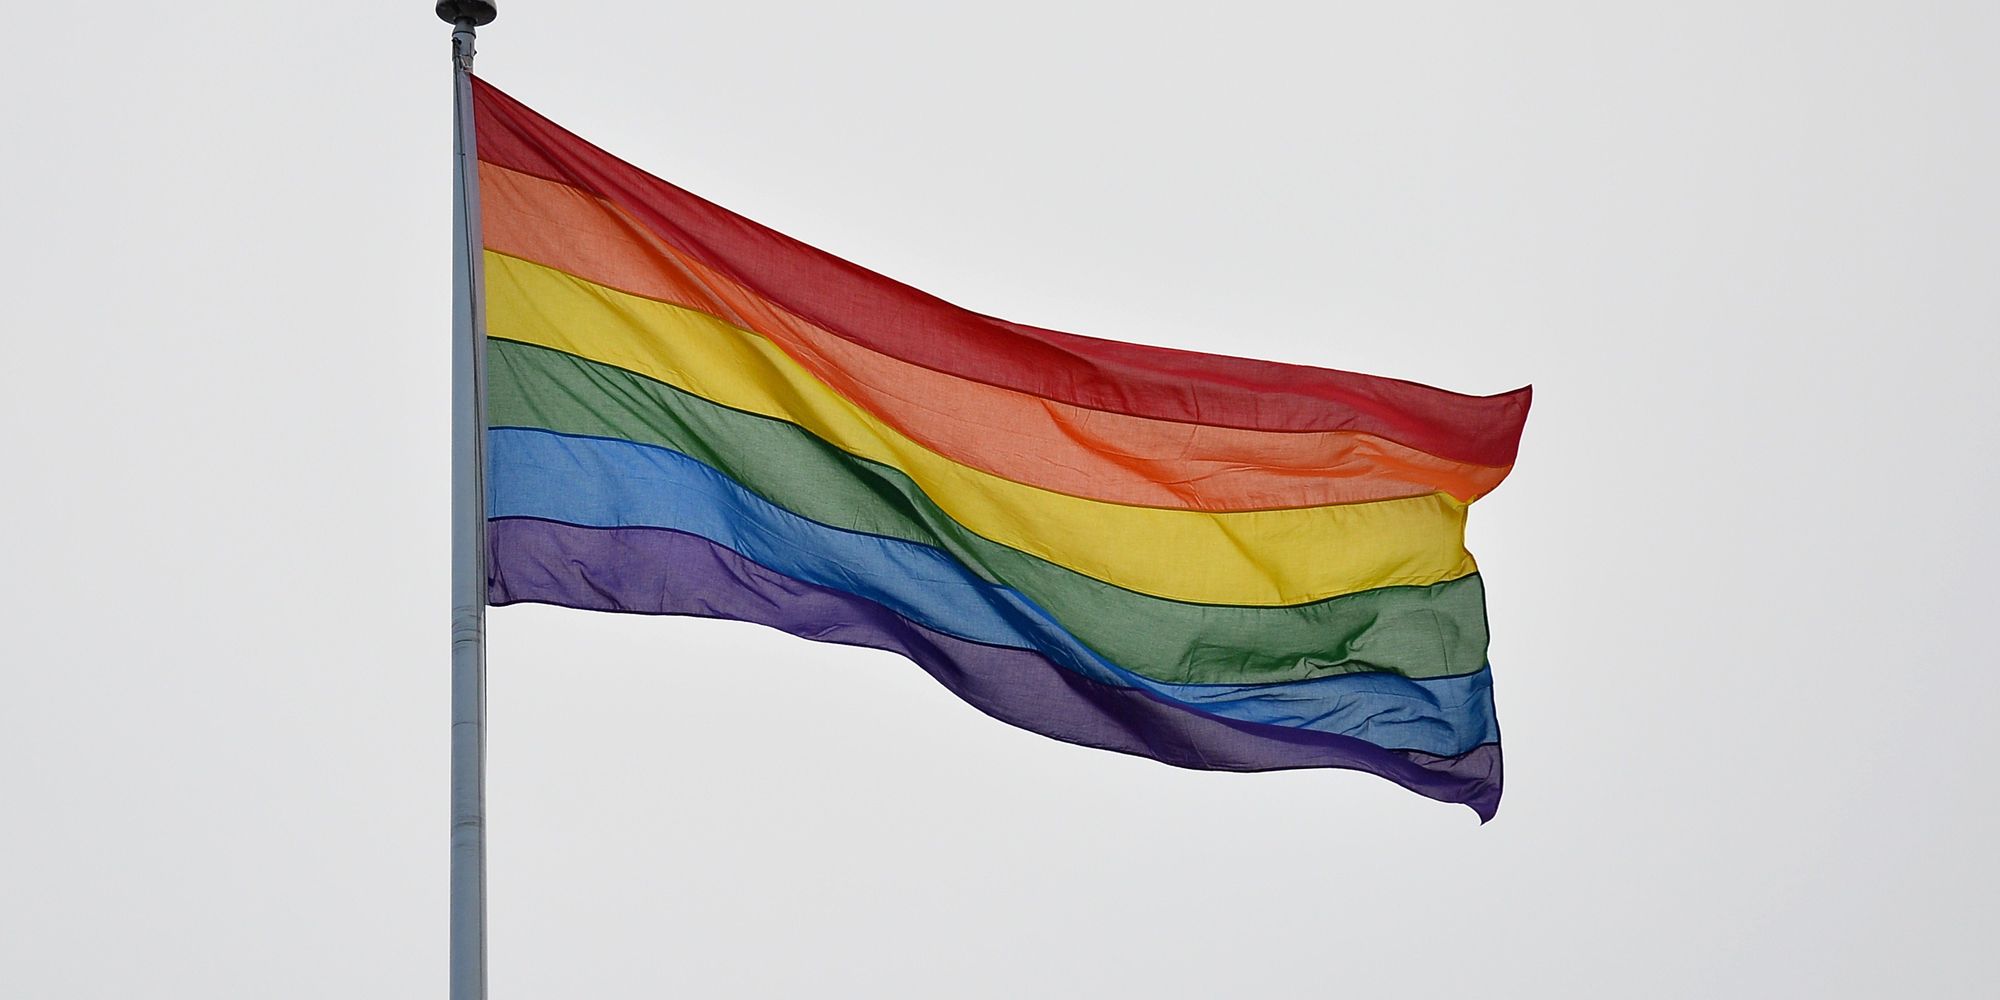 Saudi Arabian Doctor Arrested For Inadvertently Flying Rainbow Flag Above His House In Jeddah